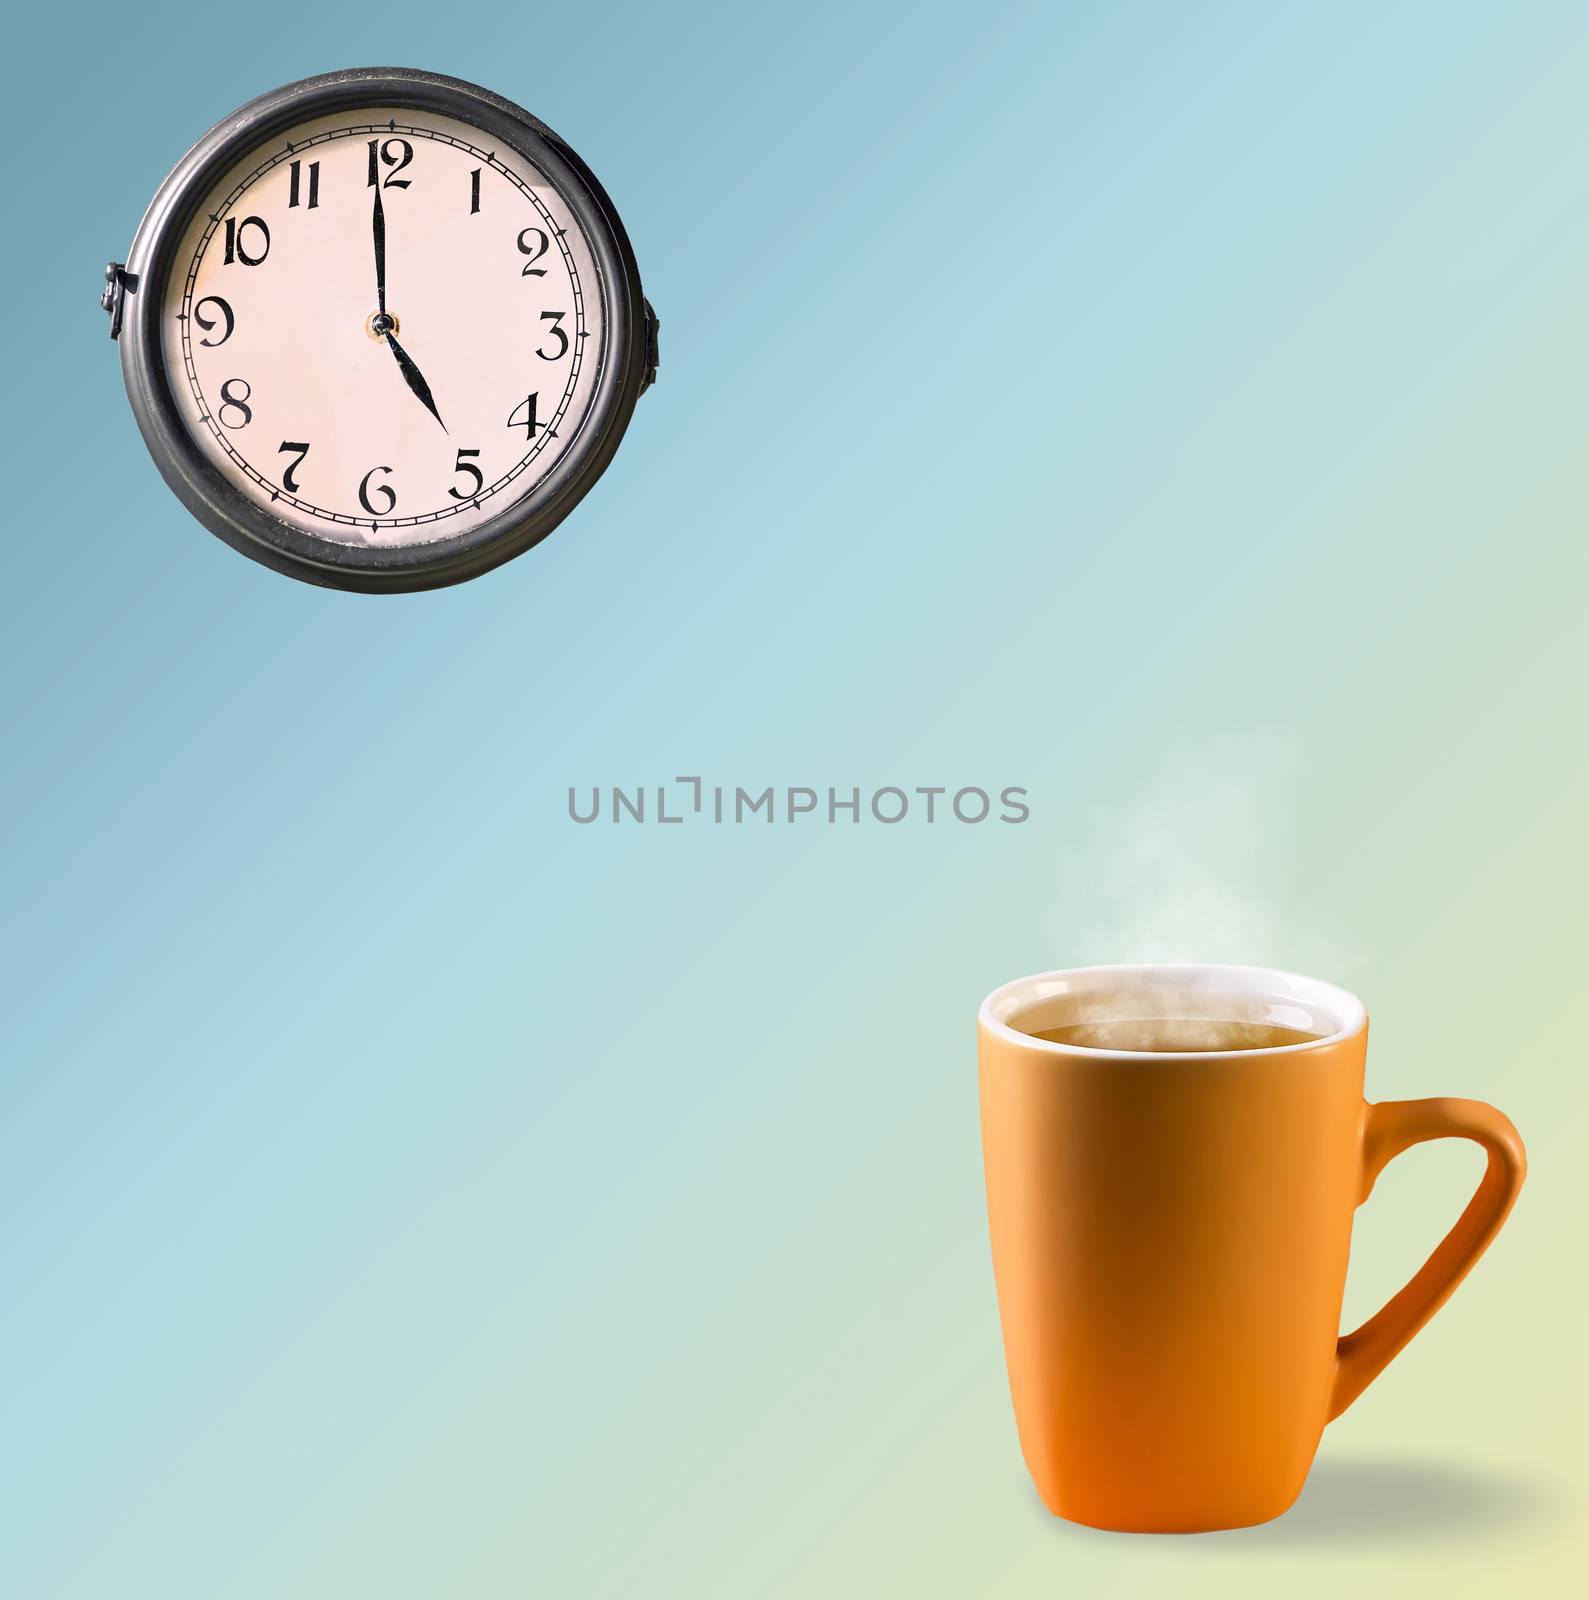 A mug of tea or coffee and a round clock on a pastel background by 977_ReX_977